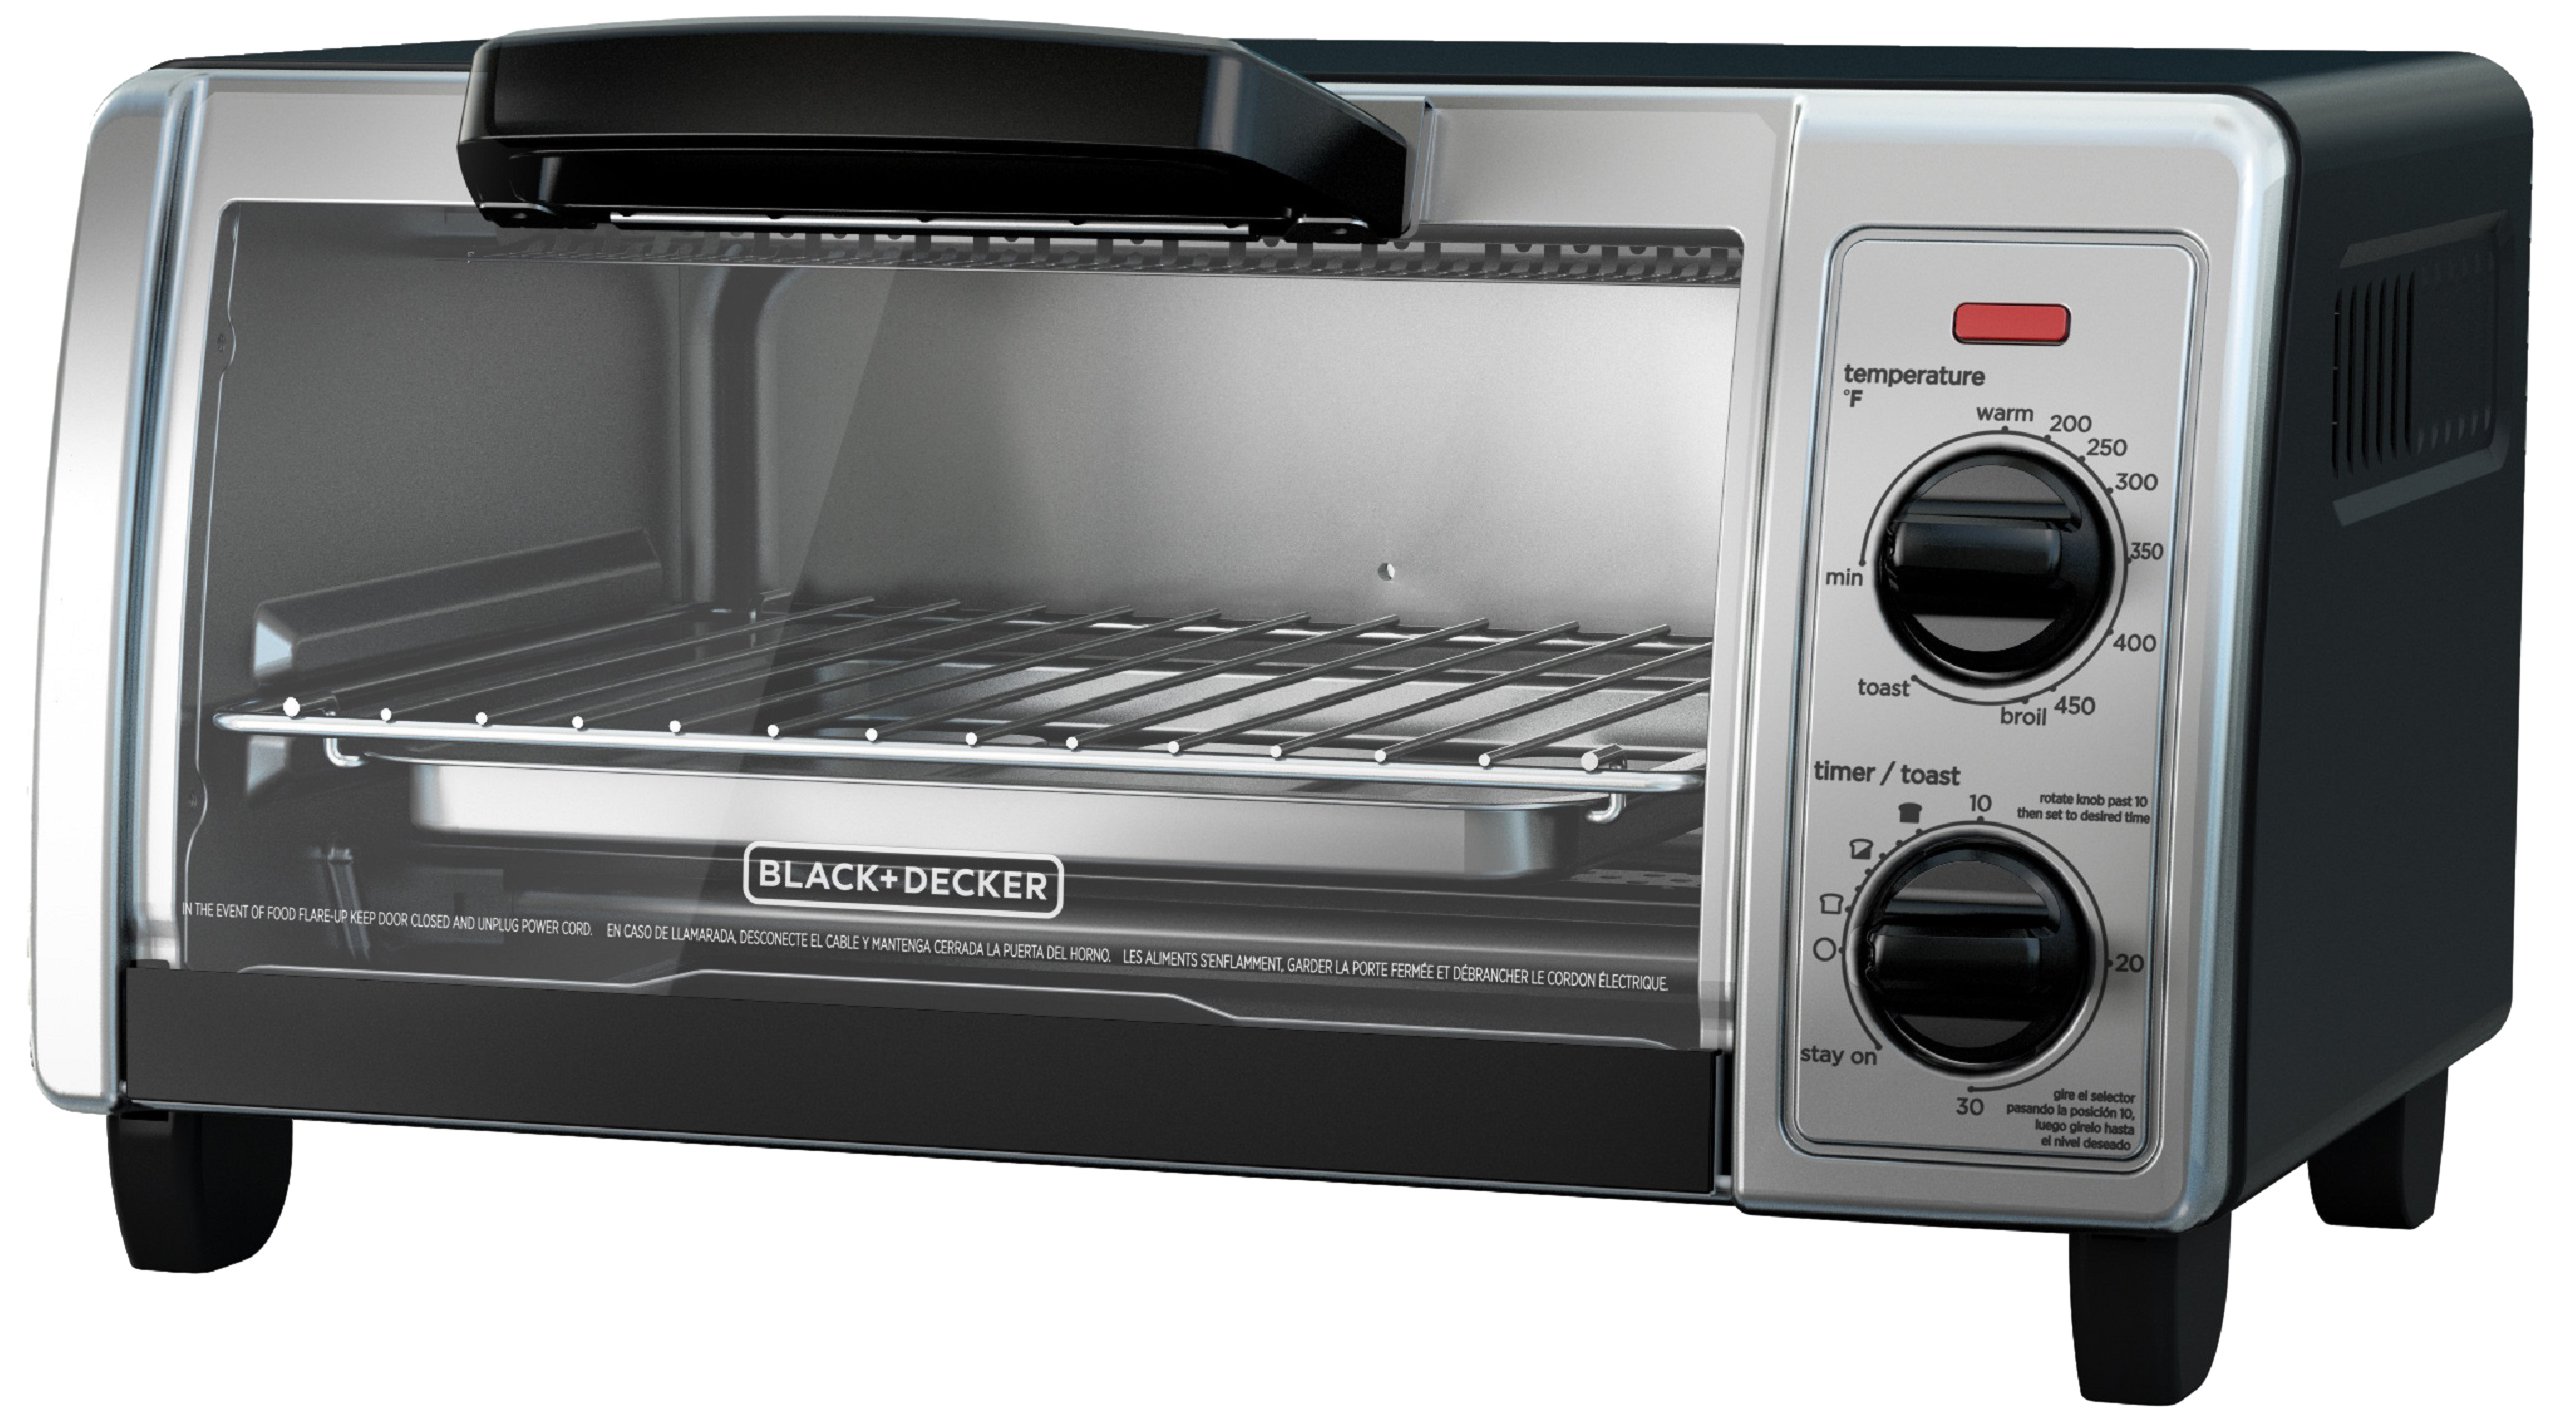 BLACK+DECKER 4-Slice Toaster Oven with Easy Controls, Stainless Steel, TO1705SB,Medium